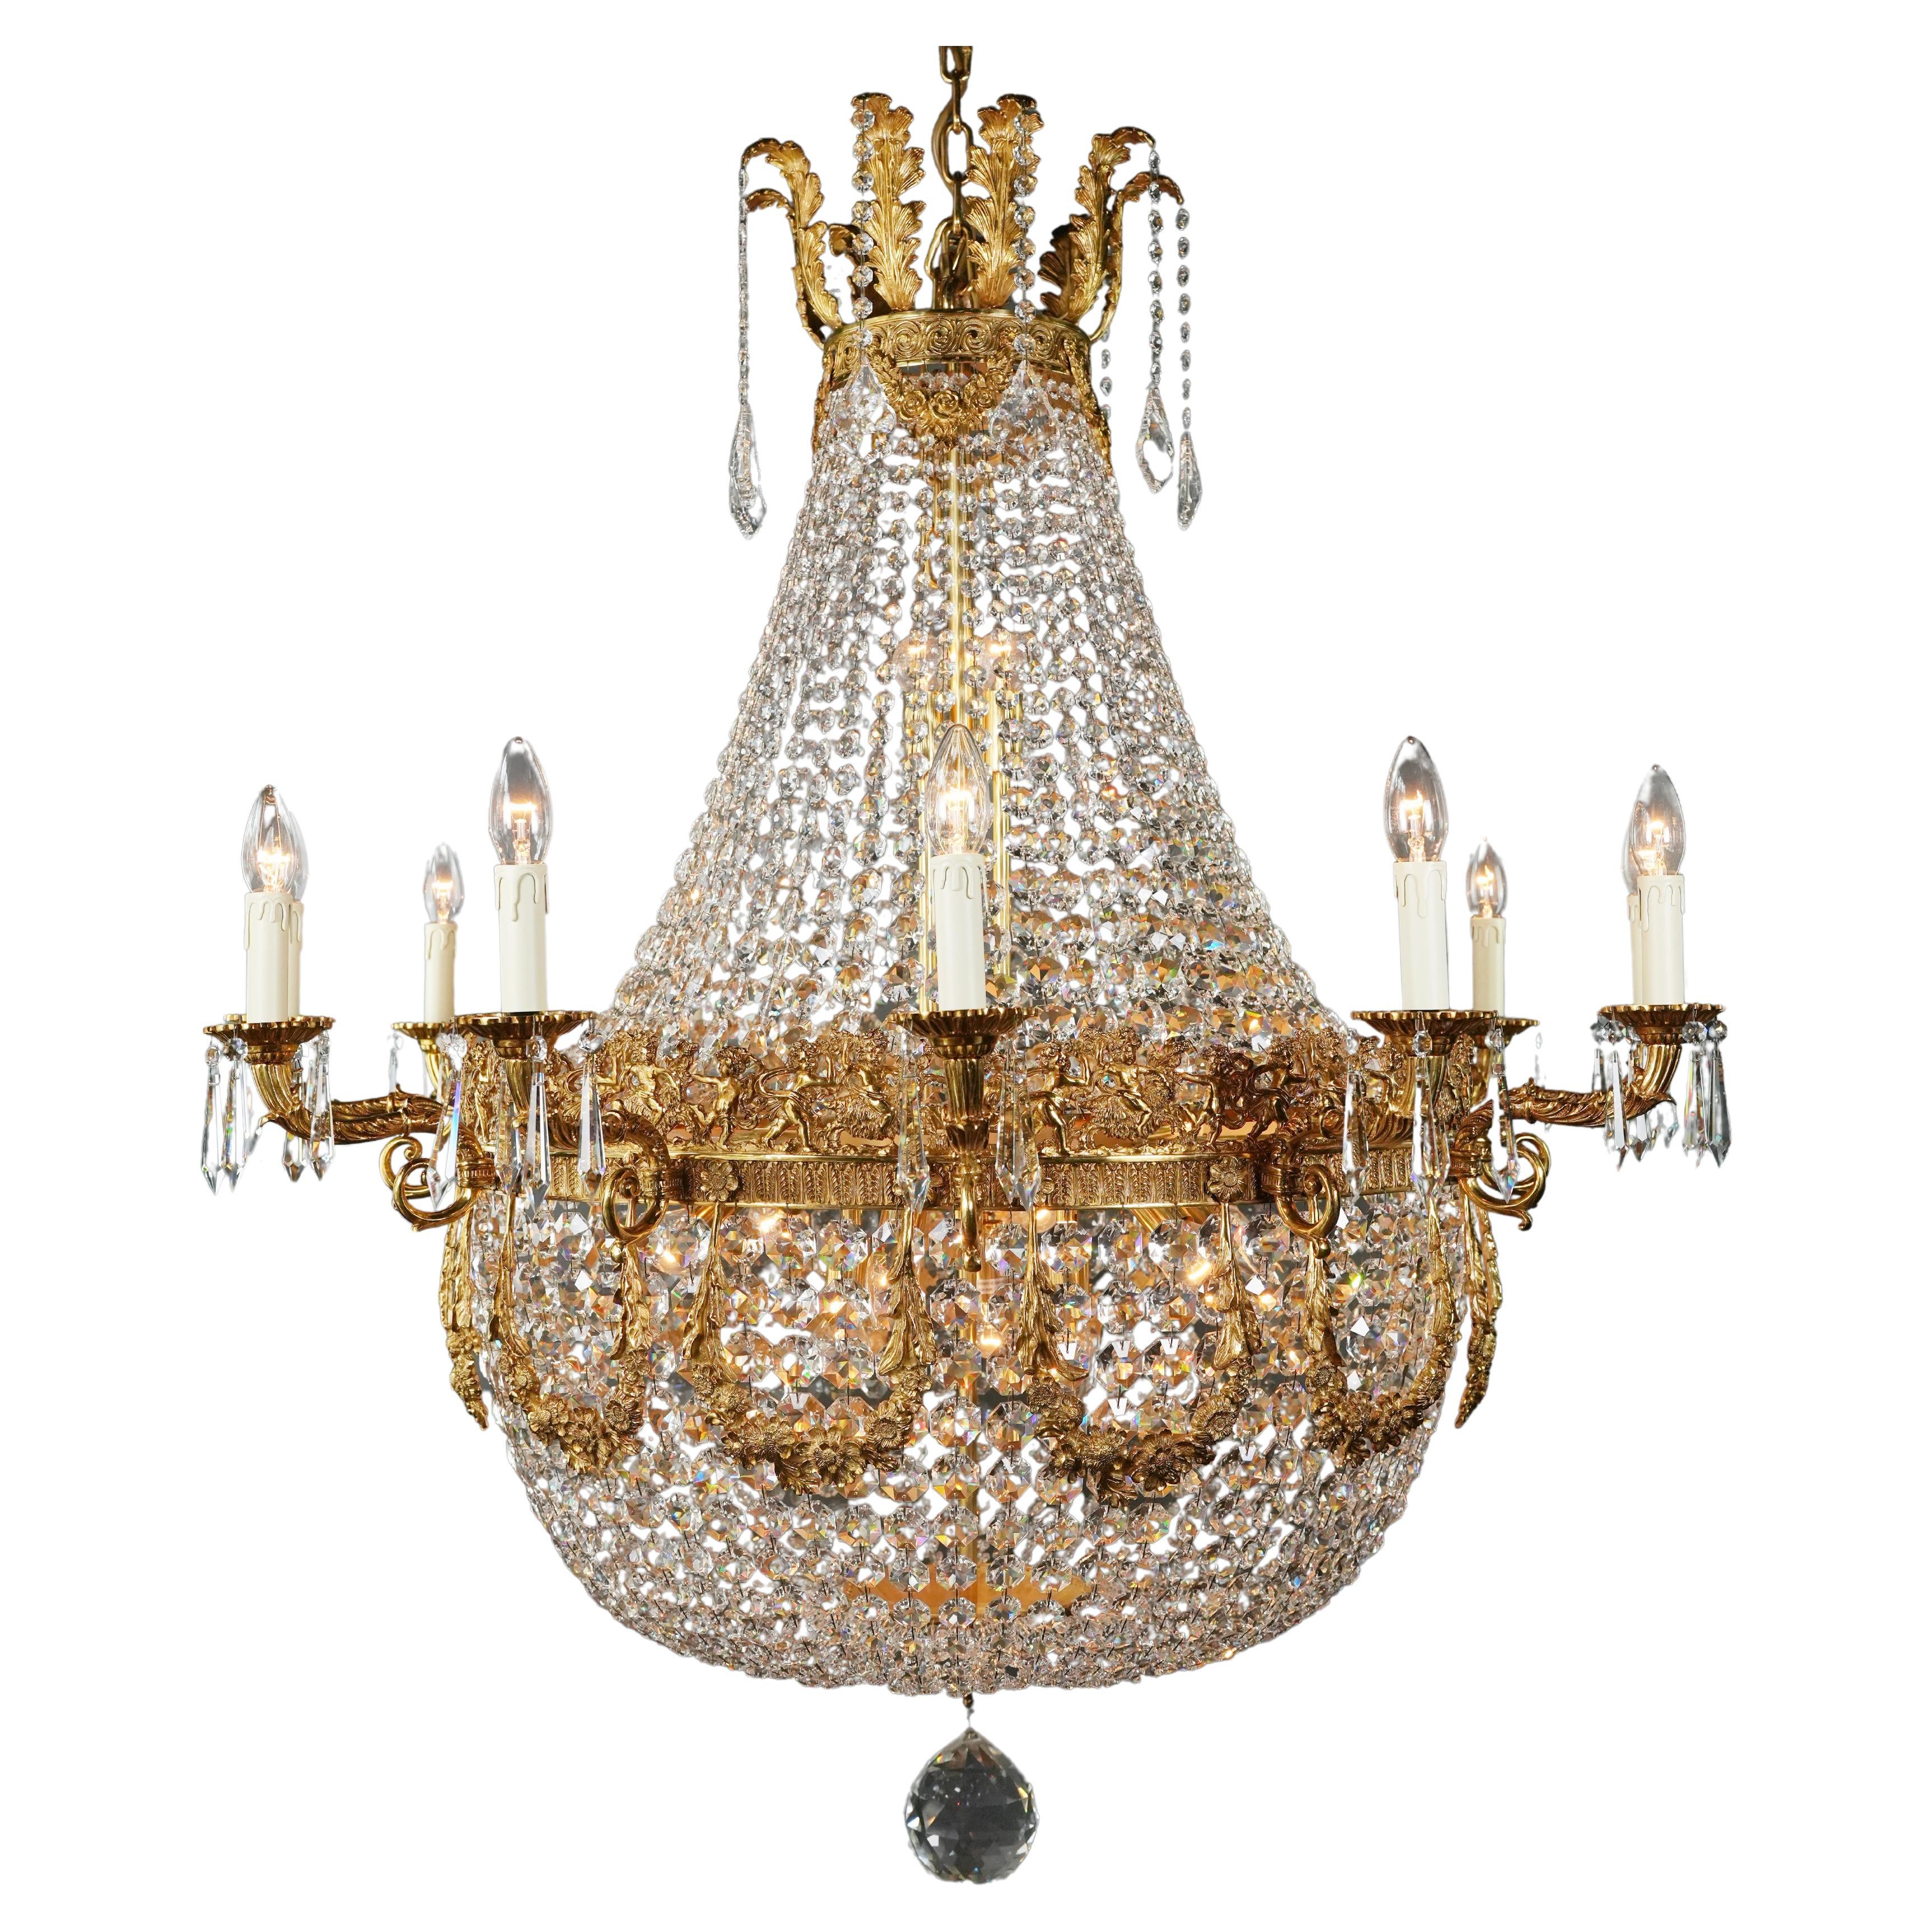 Wreat Brass Basket Empire Sac a Pearl Chandelier Crystal and Antique Gold